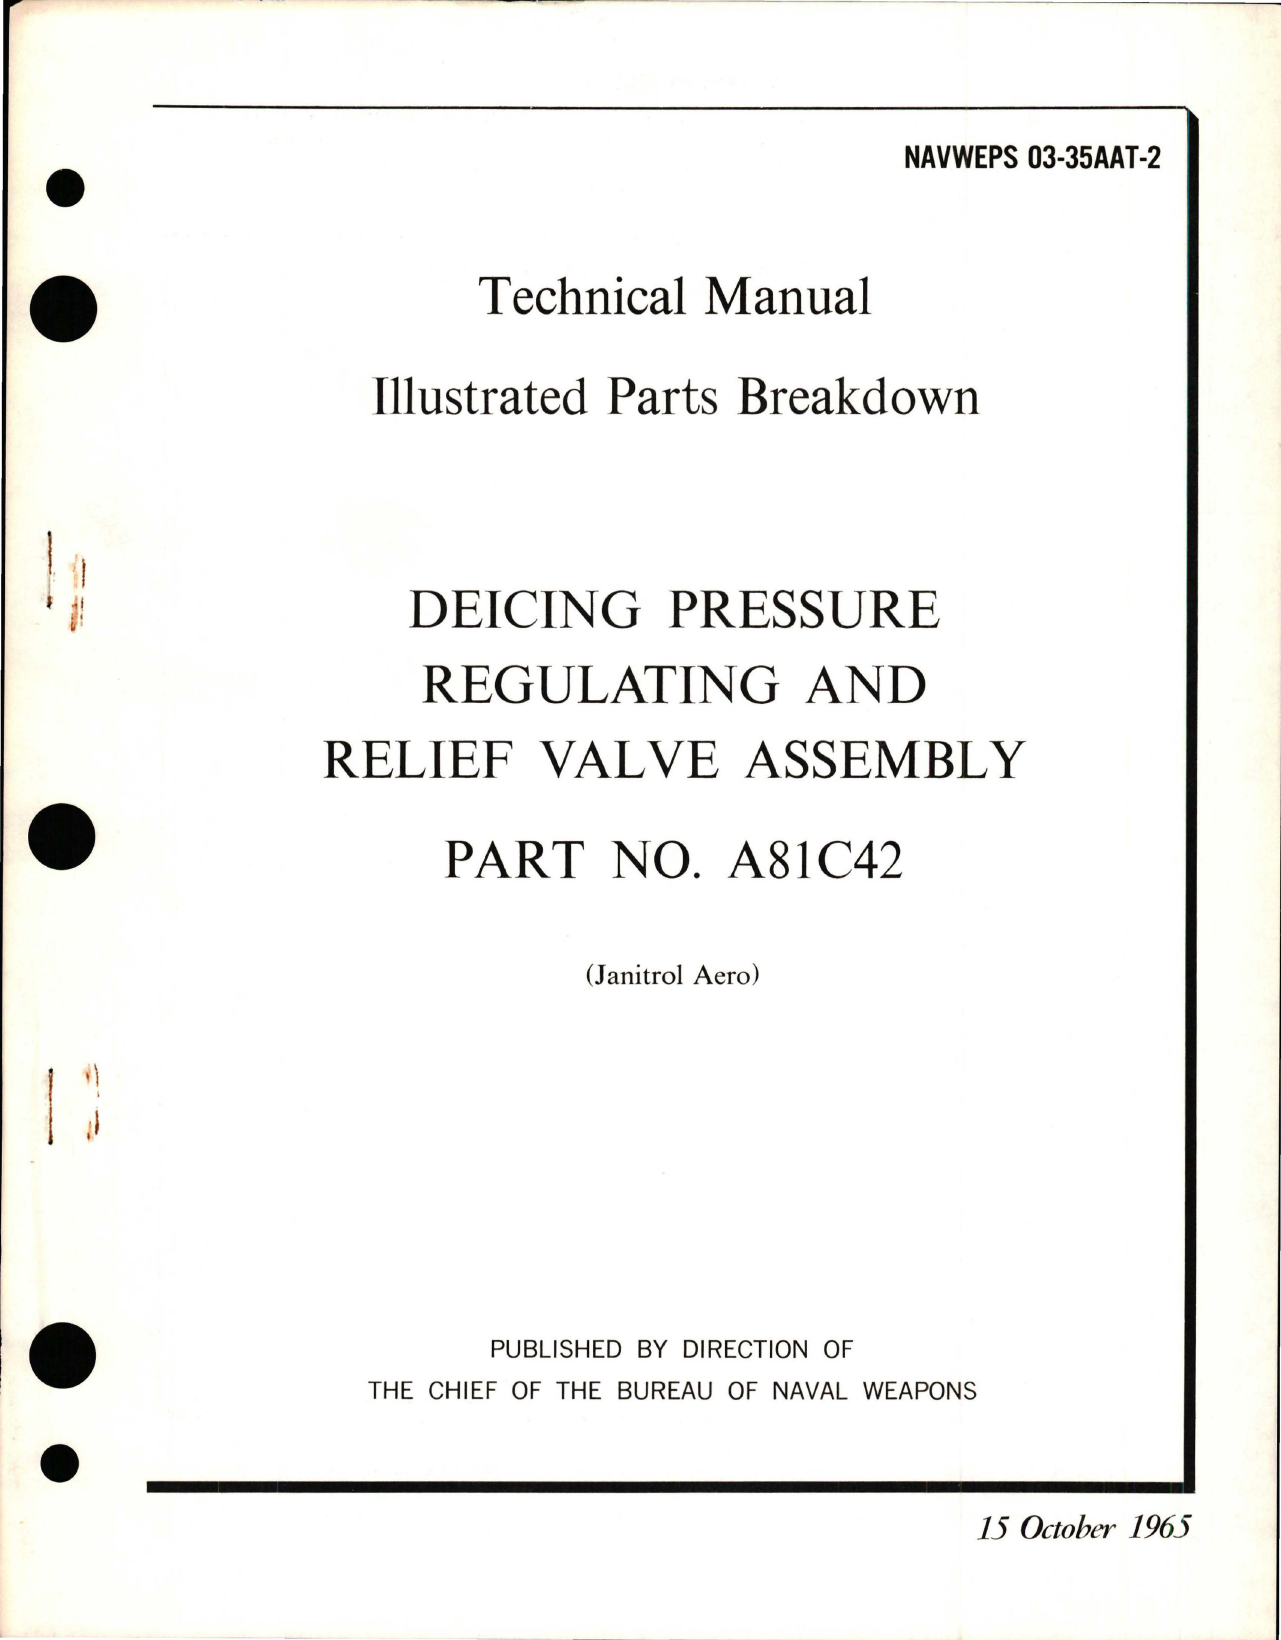 Sample page 1 from AirCorps Library document: Illustrated Parts Breakdown for Deicing Pressure Regulating and Relief Valve Assembly - Part A81C42